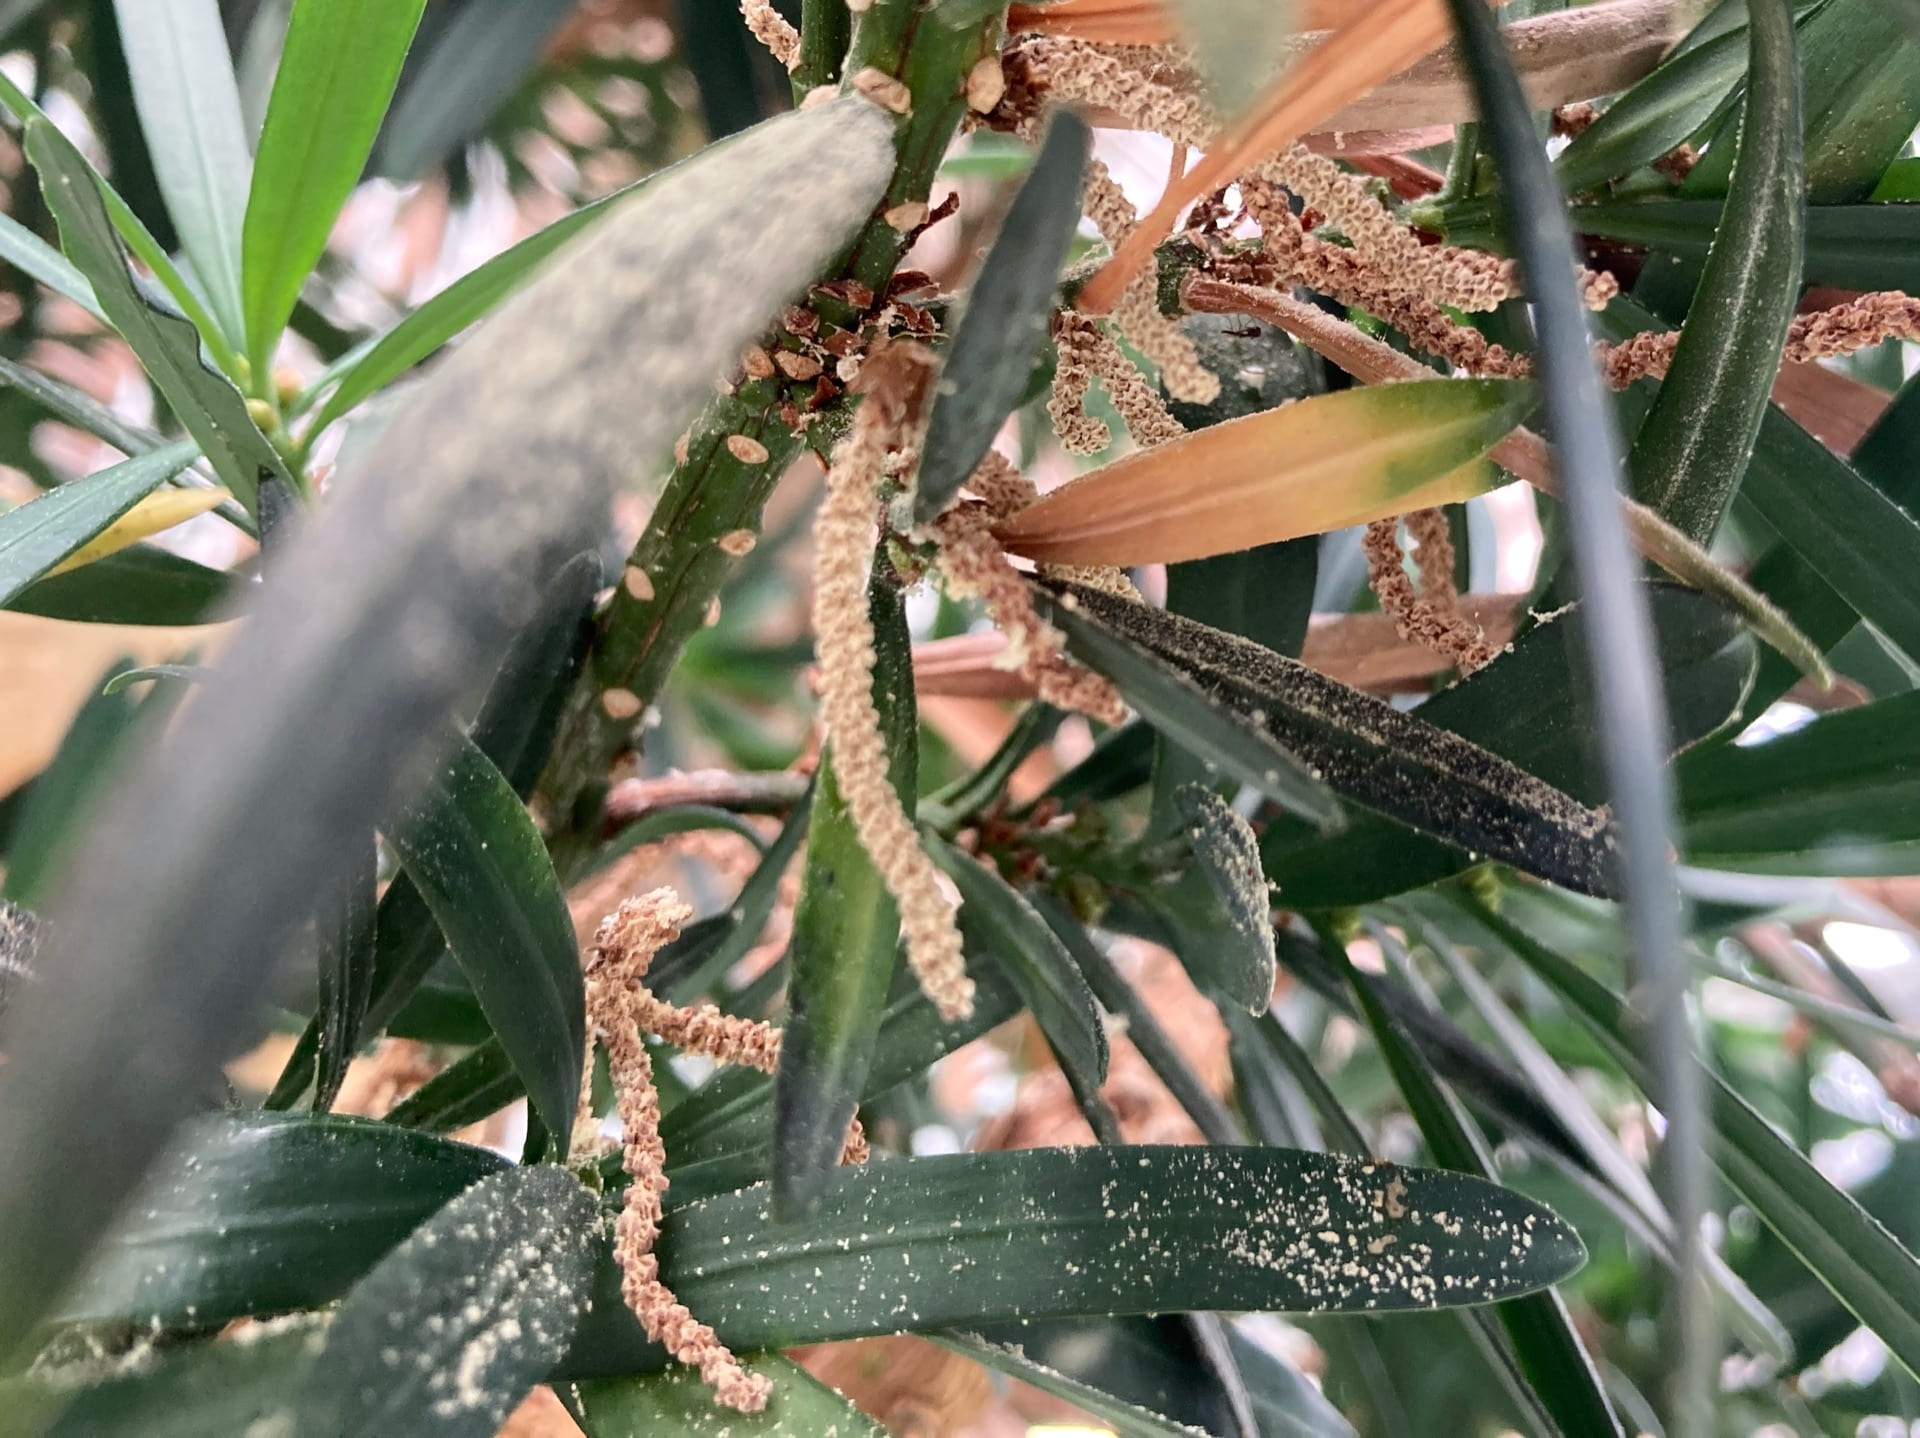 Plants can be either monoecious (having all reproductive parts on the same plant) or dioecious (having pollen bearing and seed bearing parts on different plants). This Podocarpus is dioecious, with the pollen cones seen above.